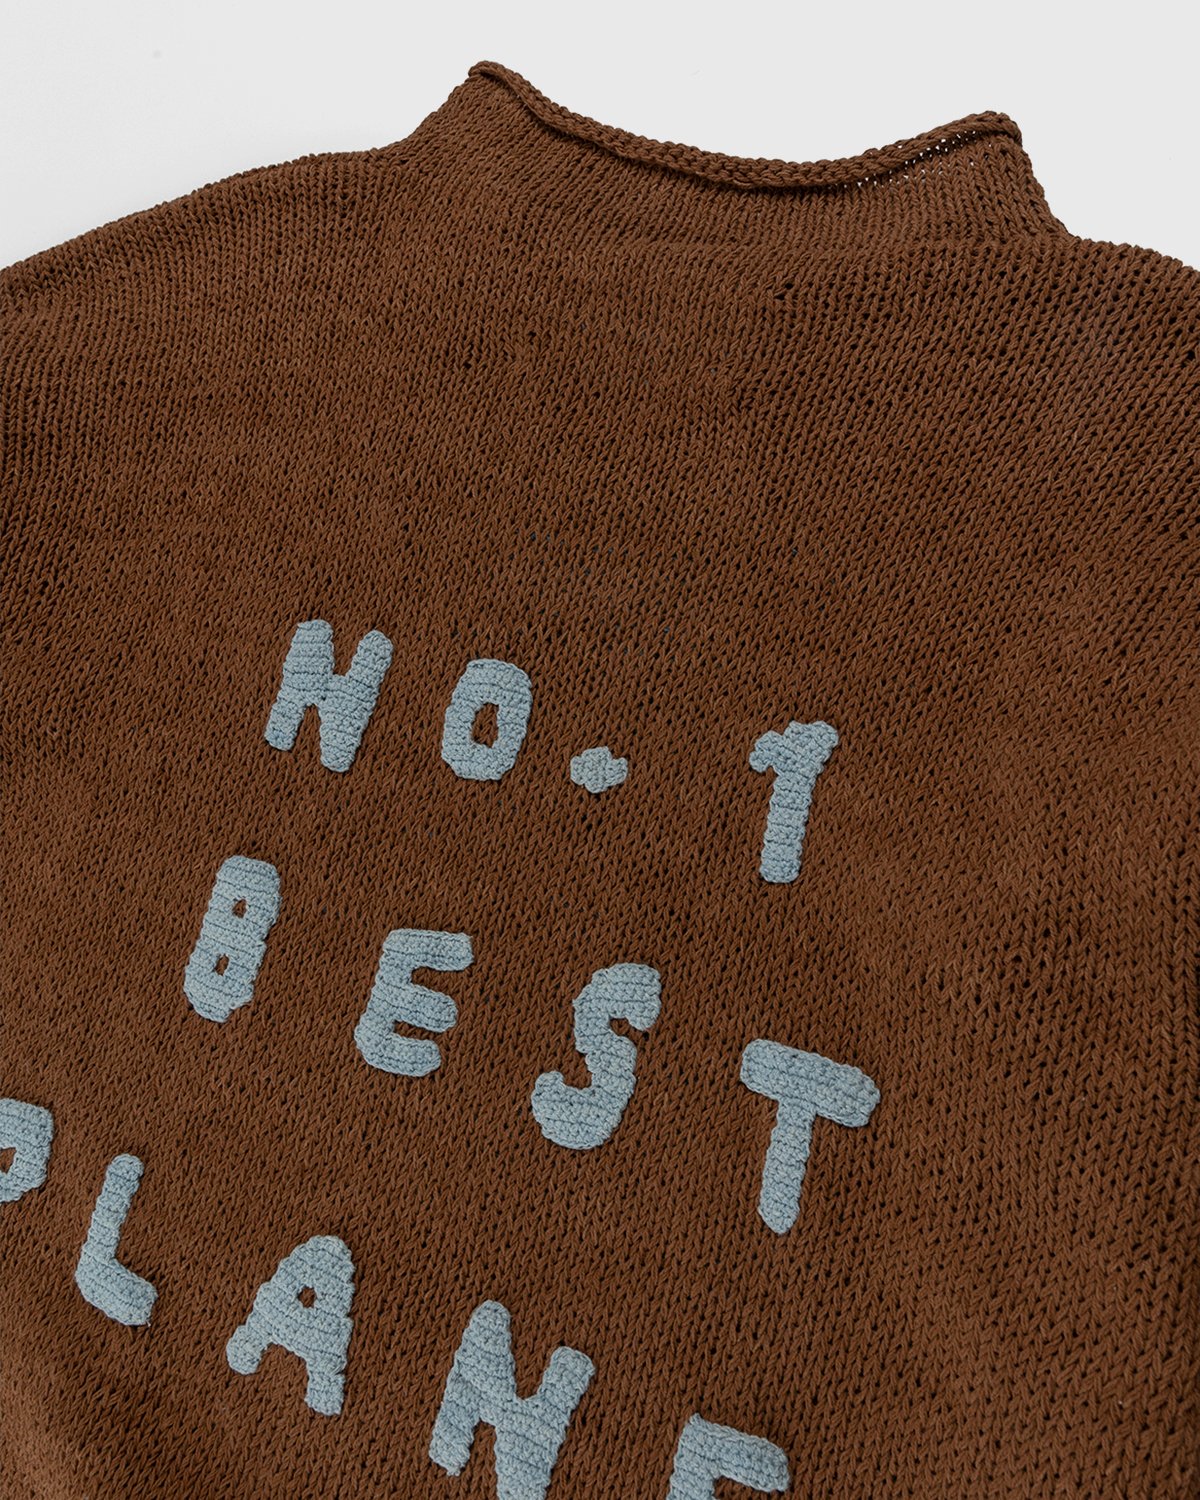 Story mfg. - Twinsun Rollneck Sweater Mother Earth Brown - Clothing - Brown - Image 3